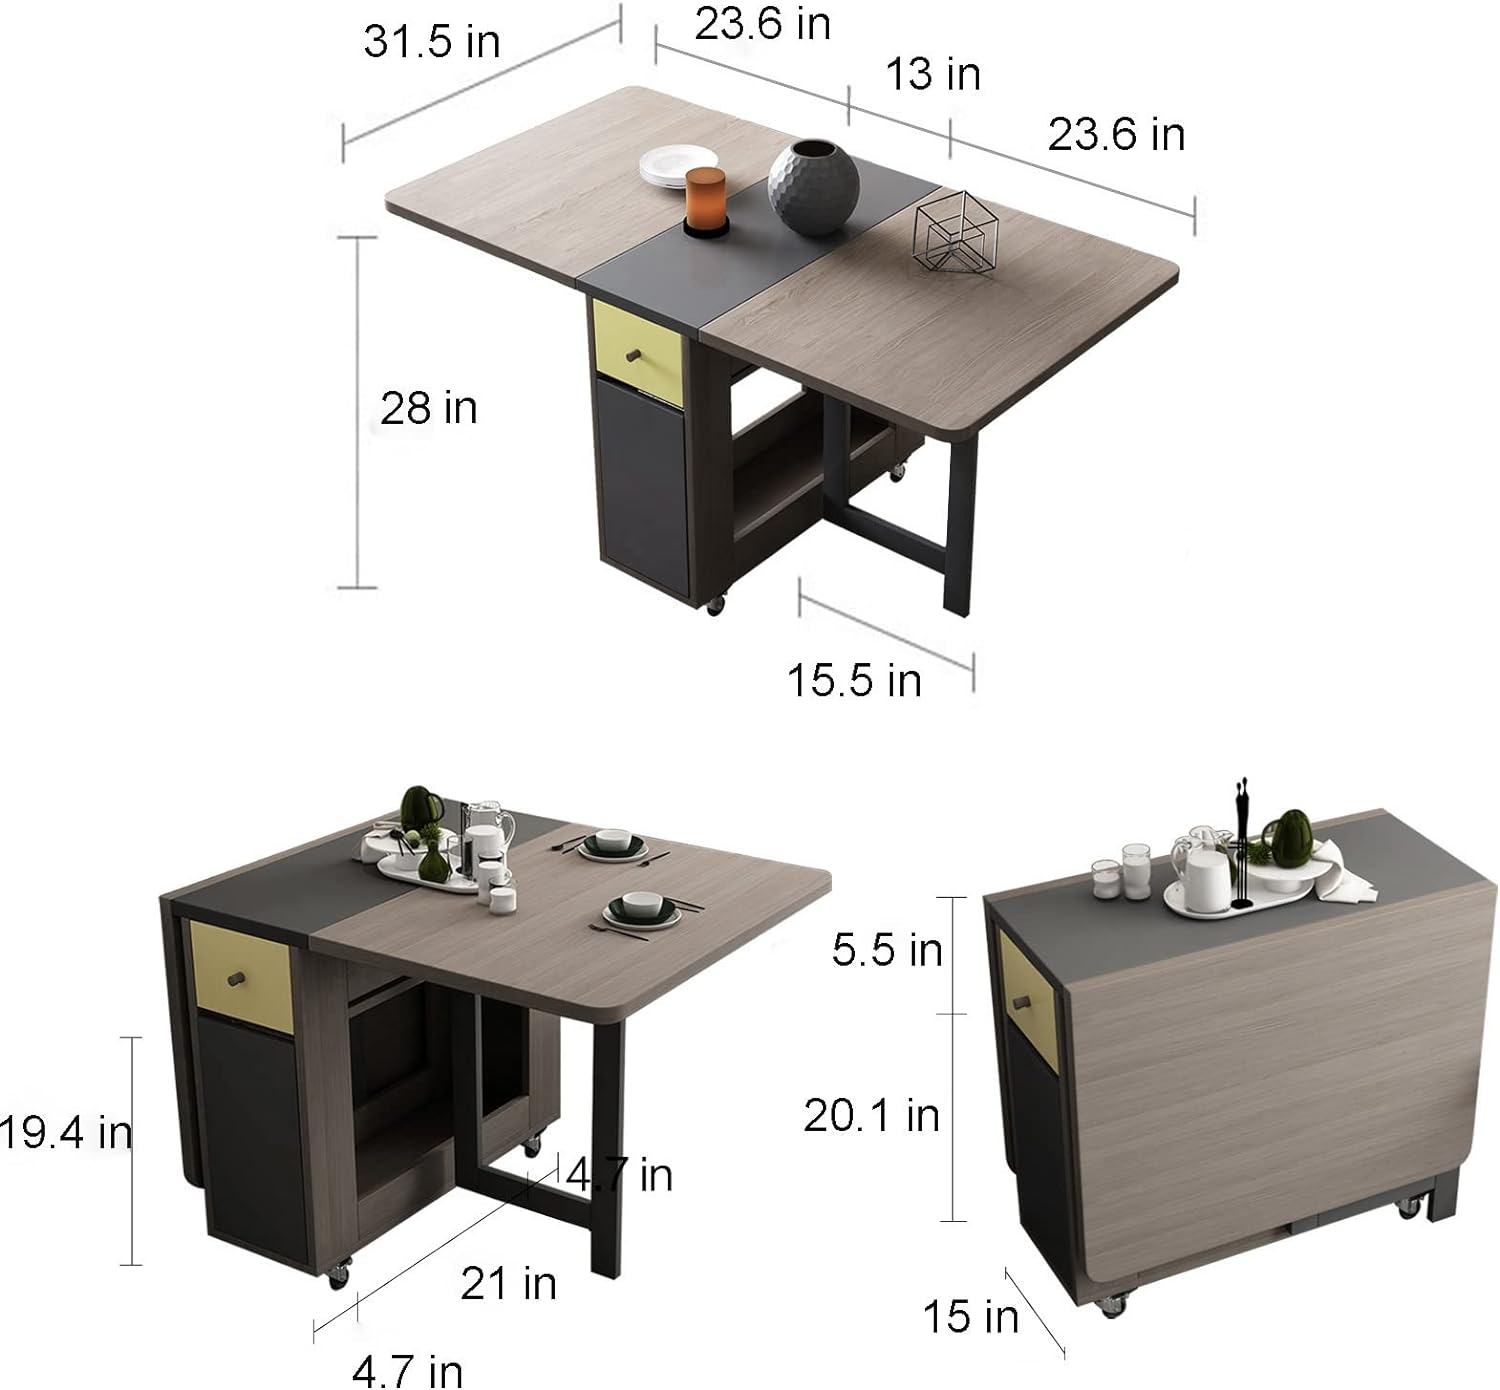 Folding Dining Table with Storage Rack and 2 Drawers in 3 Forms